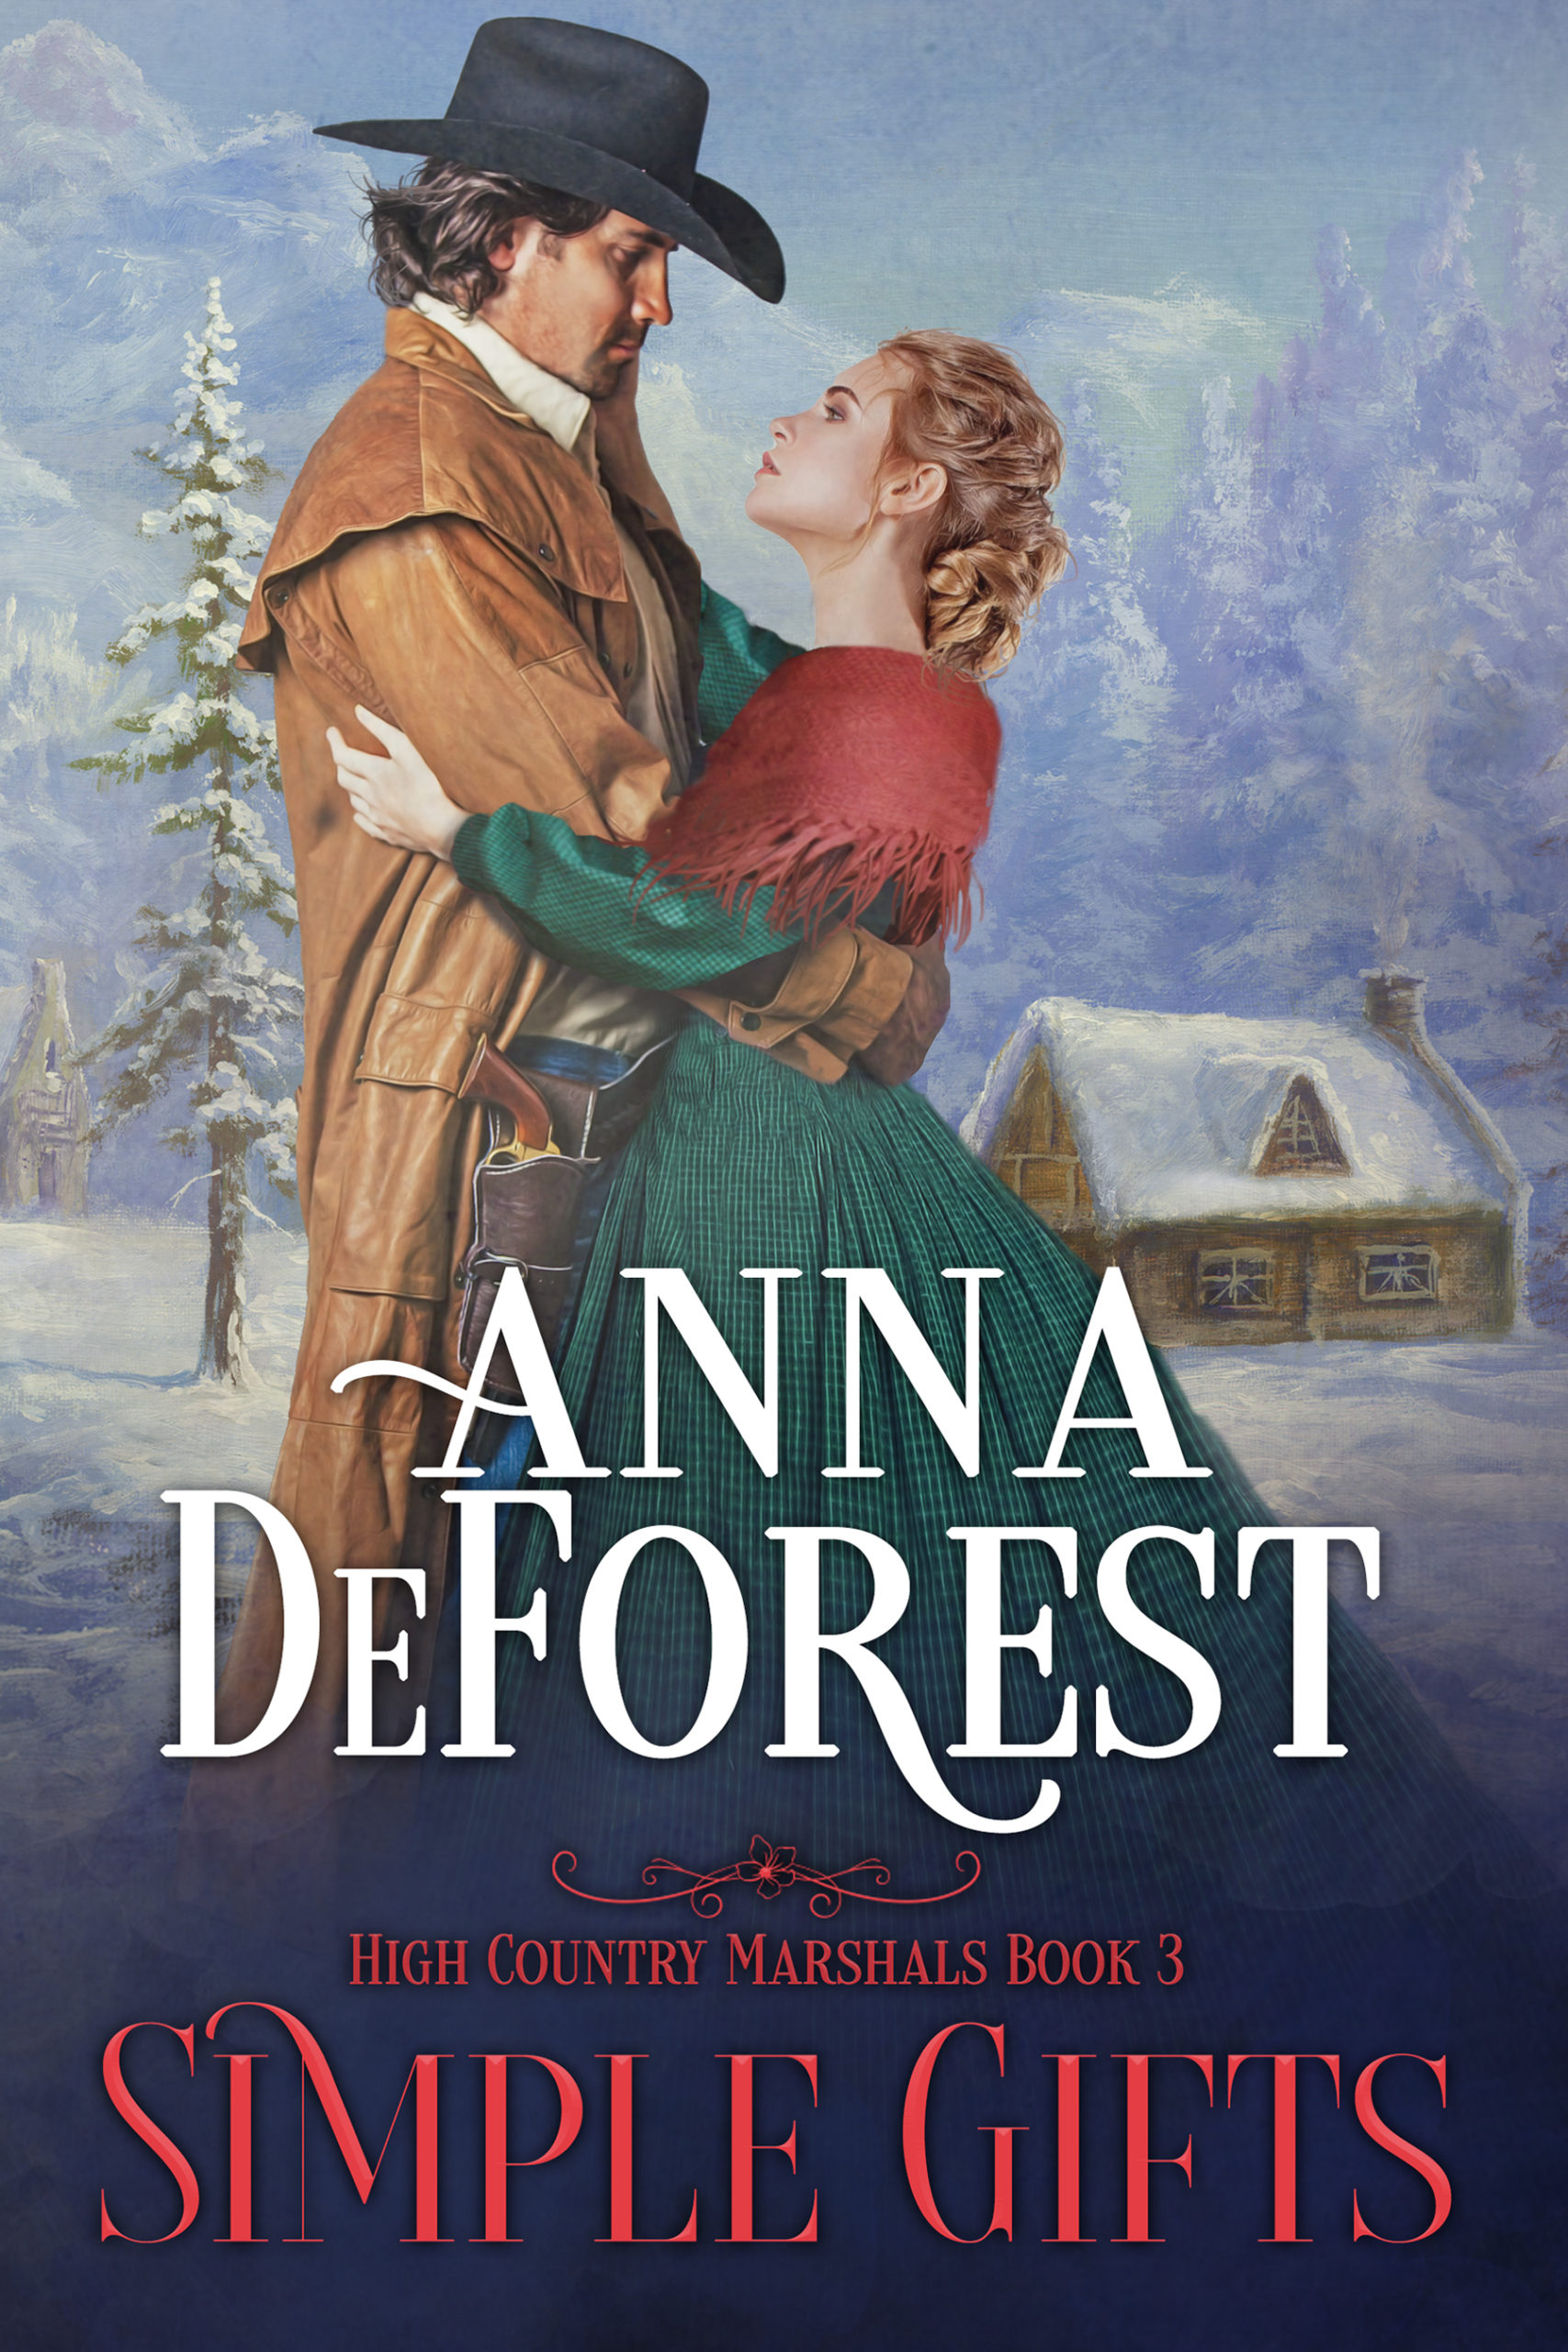 SIMPLE GIFTS by Anna DeForest